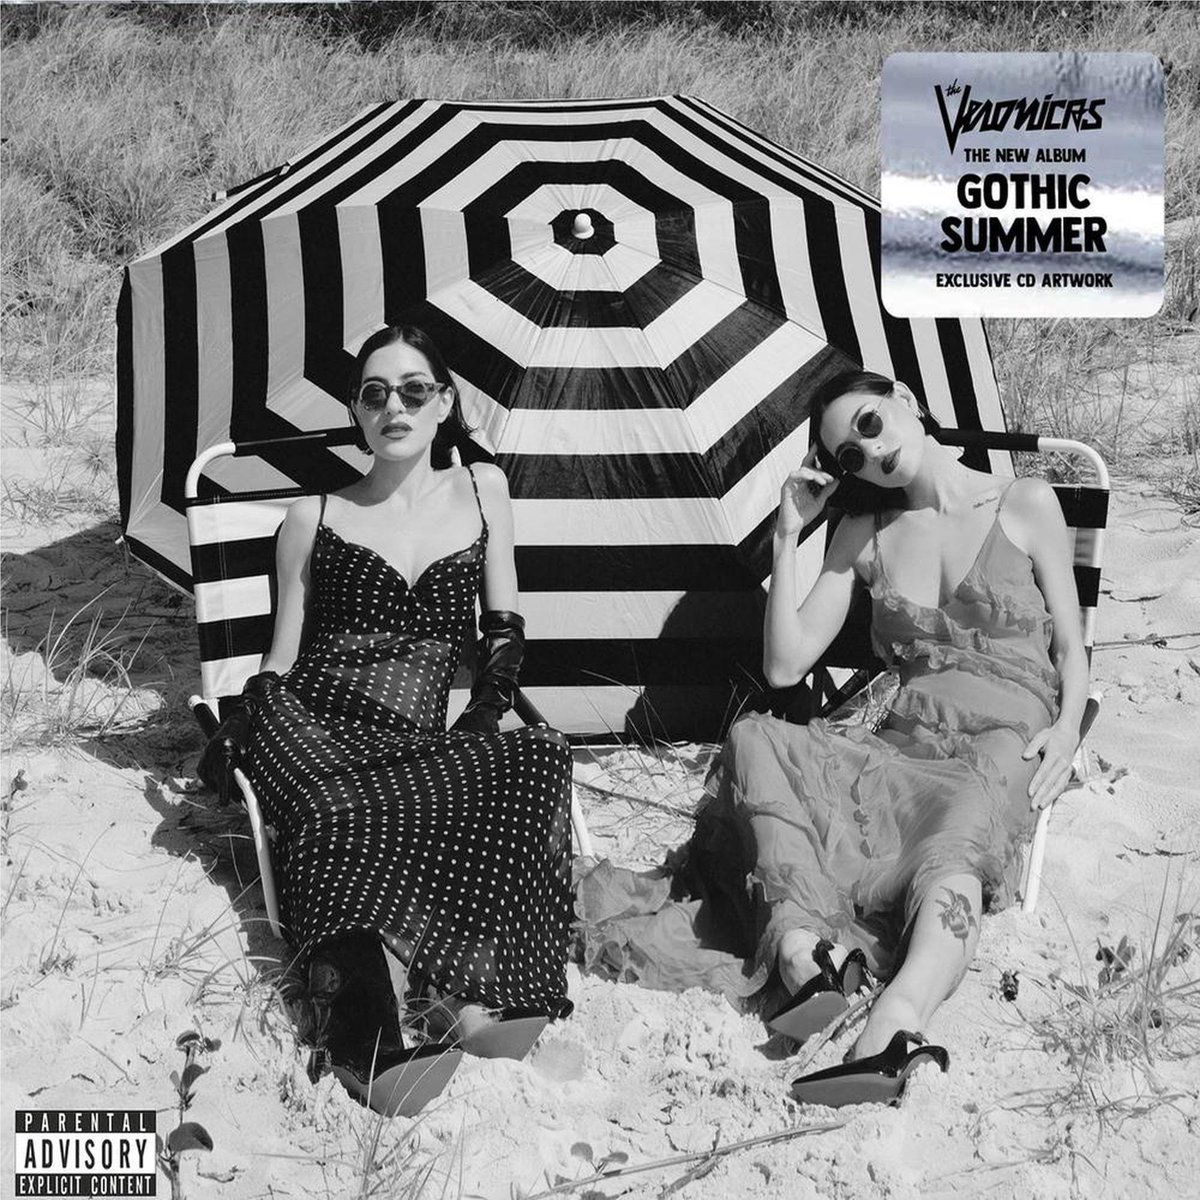 Pre-order @TheVeronicas 'Gothic Summer' (Exclusive Artwork) @JBHiFi CD now! Link in bio! 🌴🕸️